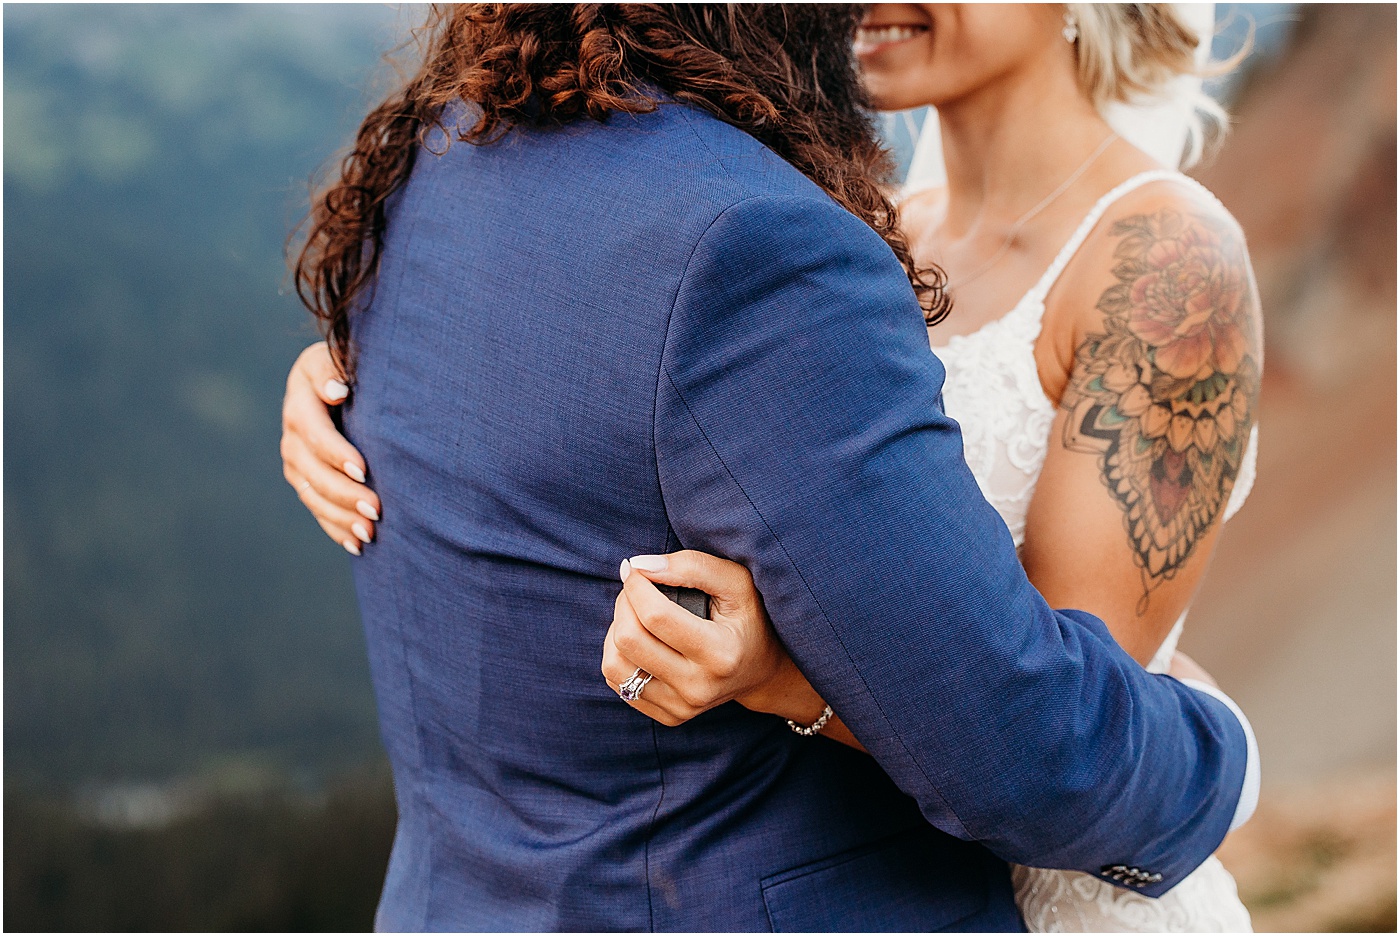 Newlyweds embracing after elopement | Photo by Megan Montalvo Photography